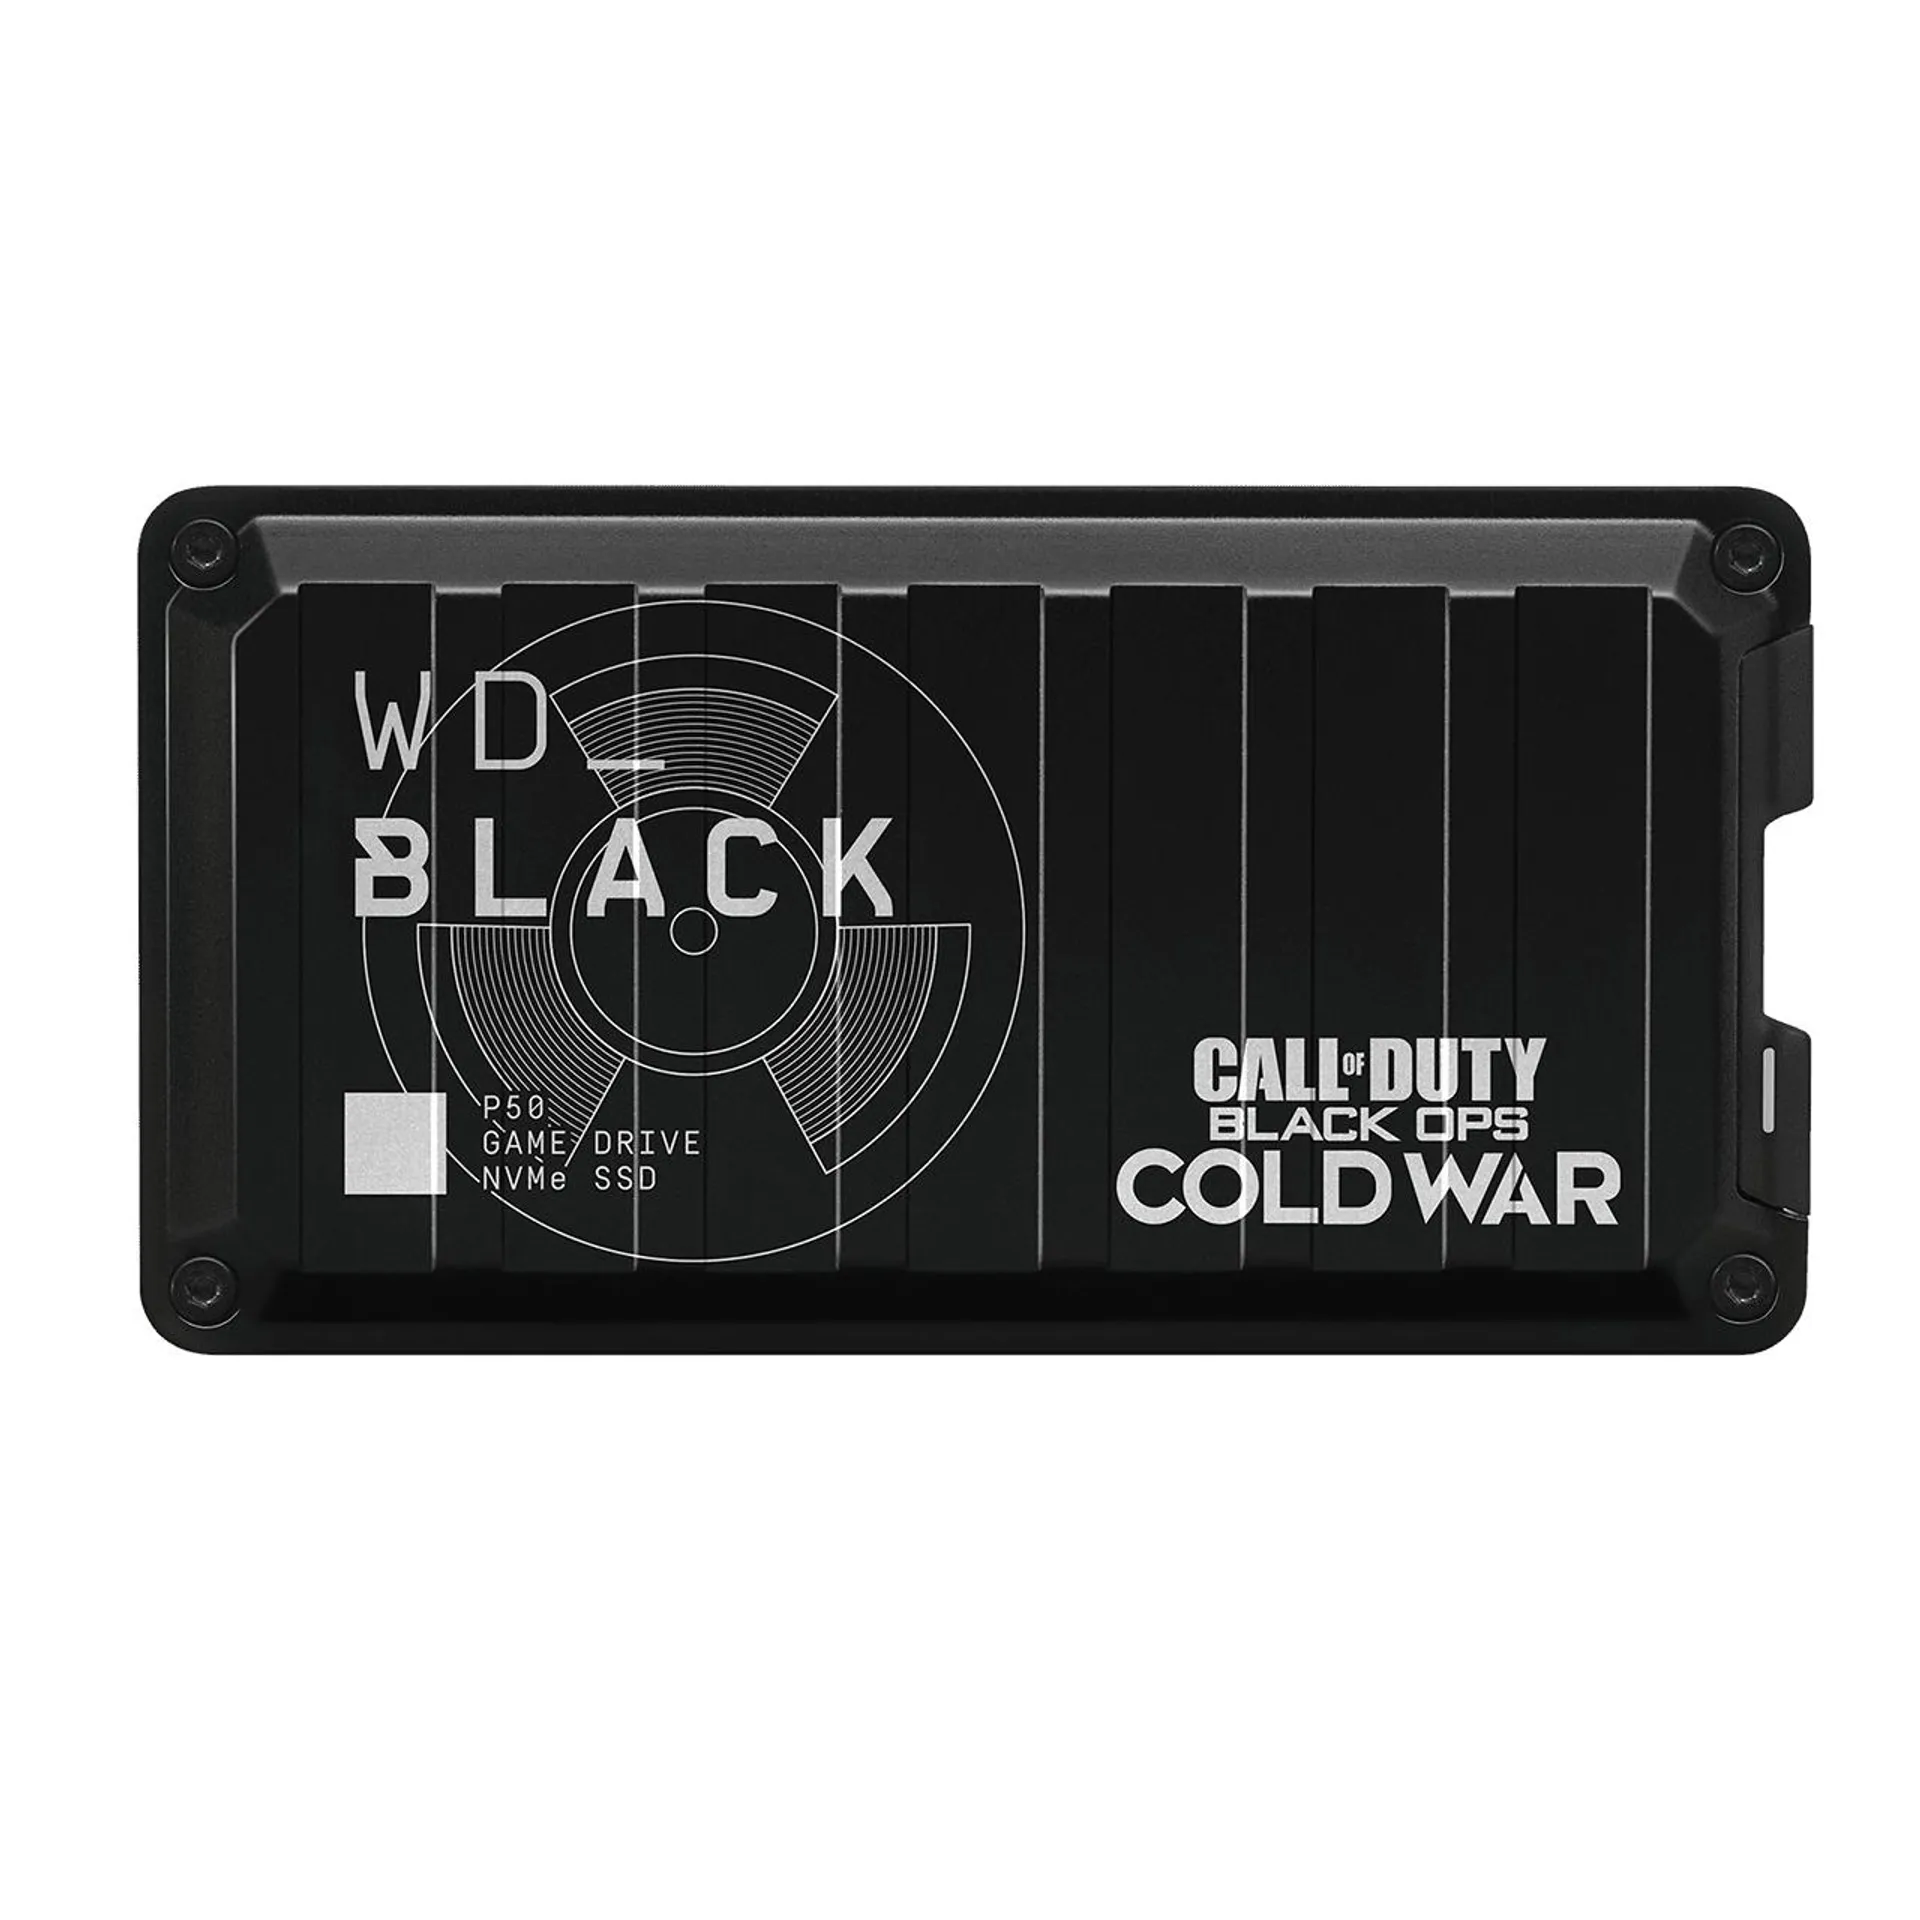 Clearance- WD_BLACK Call of Duty®: Black Ops Cold War Special Edition P50 Game Drive NVMe™ SSD de WD_BLACK